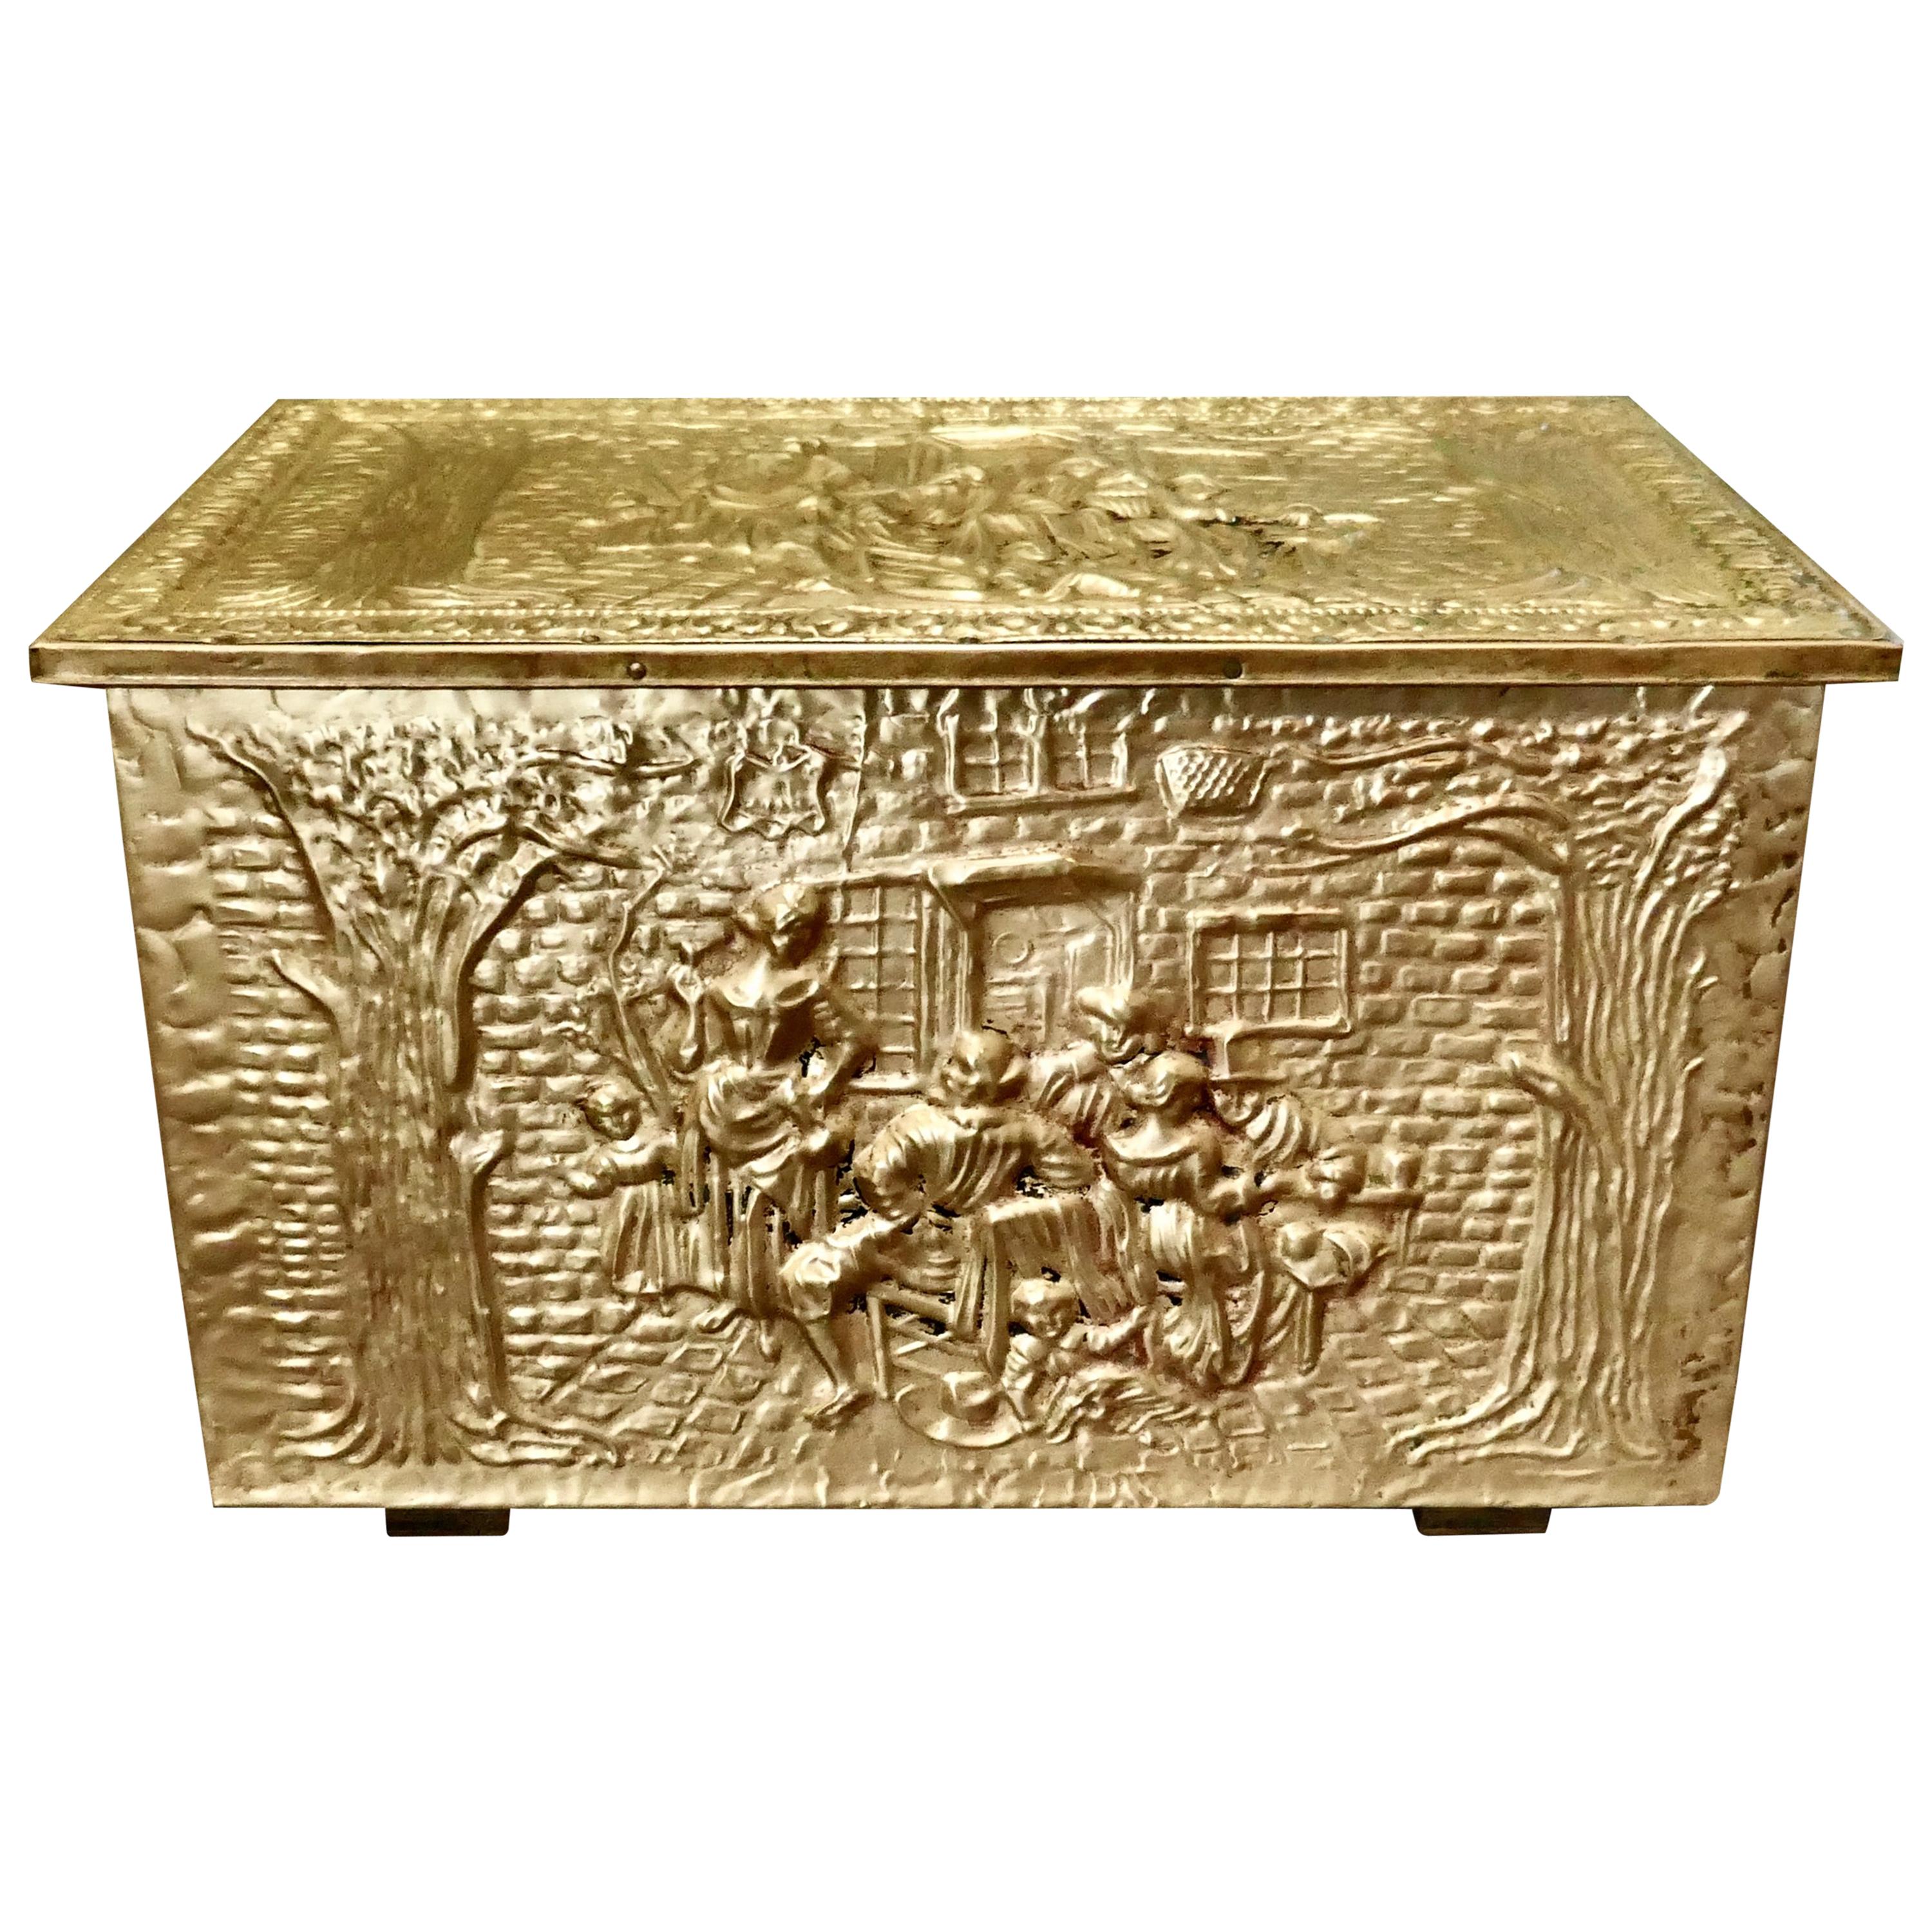 Embossed Brass Log or Coal Box, or Slipper Box with Tavern Scenes